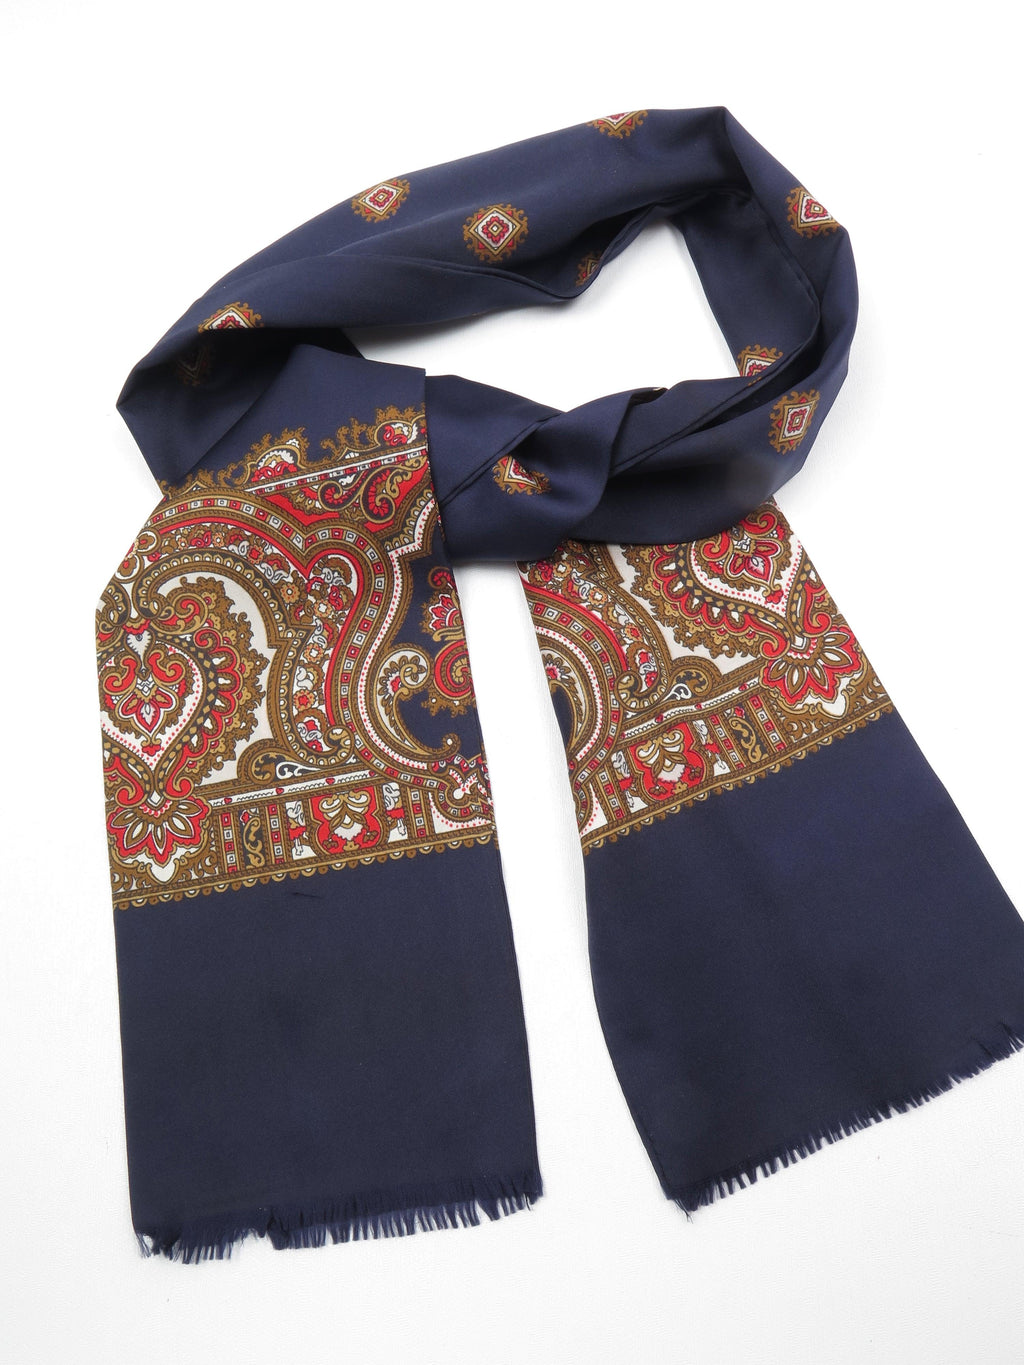 Men's Vintage Navy & Paisley Scarf - The Harlequin